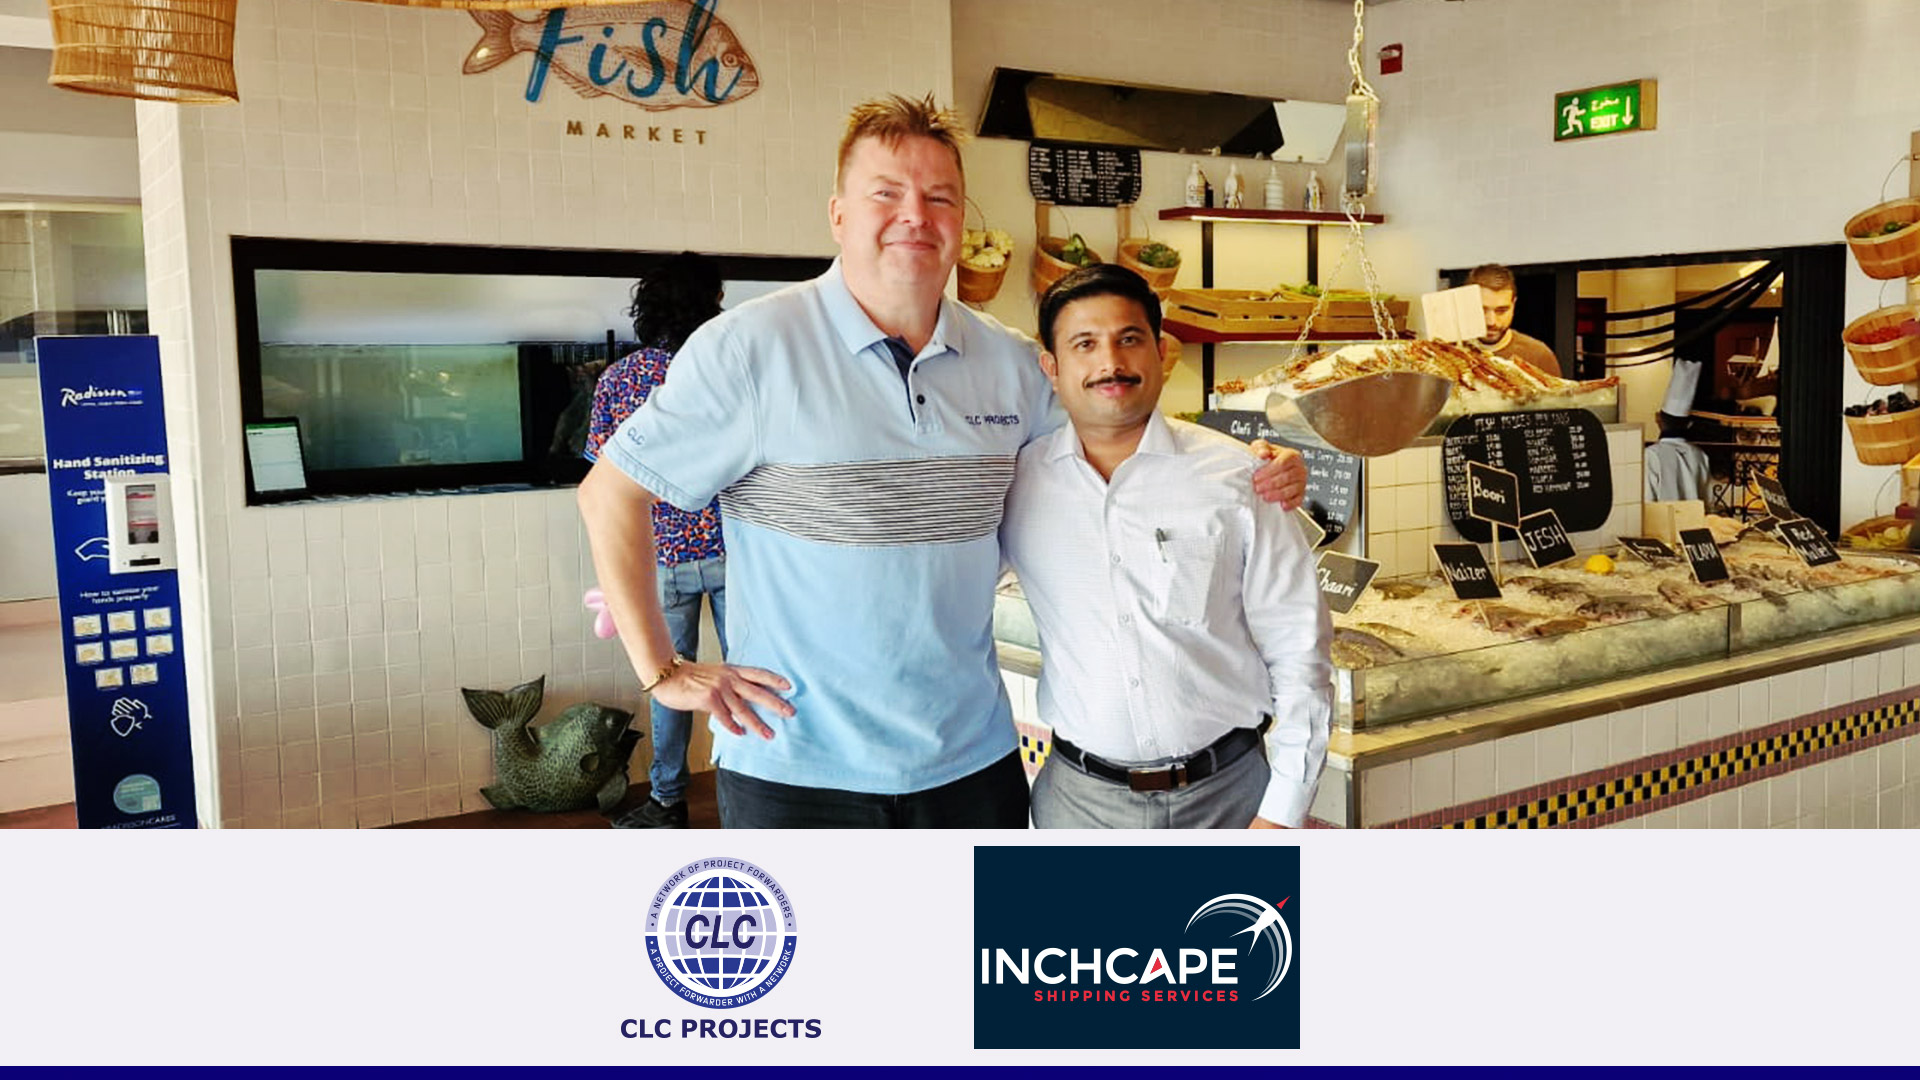 CLC Projects Chairman with Deljo Poulose, Regional Sales Manager - Liner Services at Inchcape Shipping Services in Dubai UAE